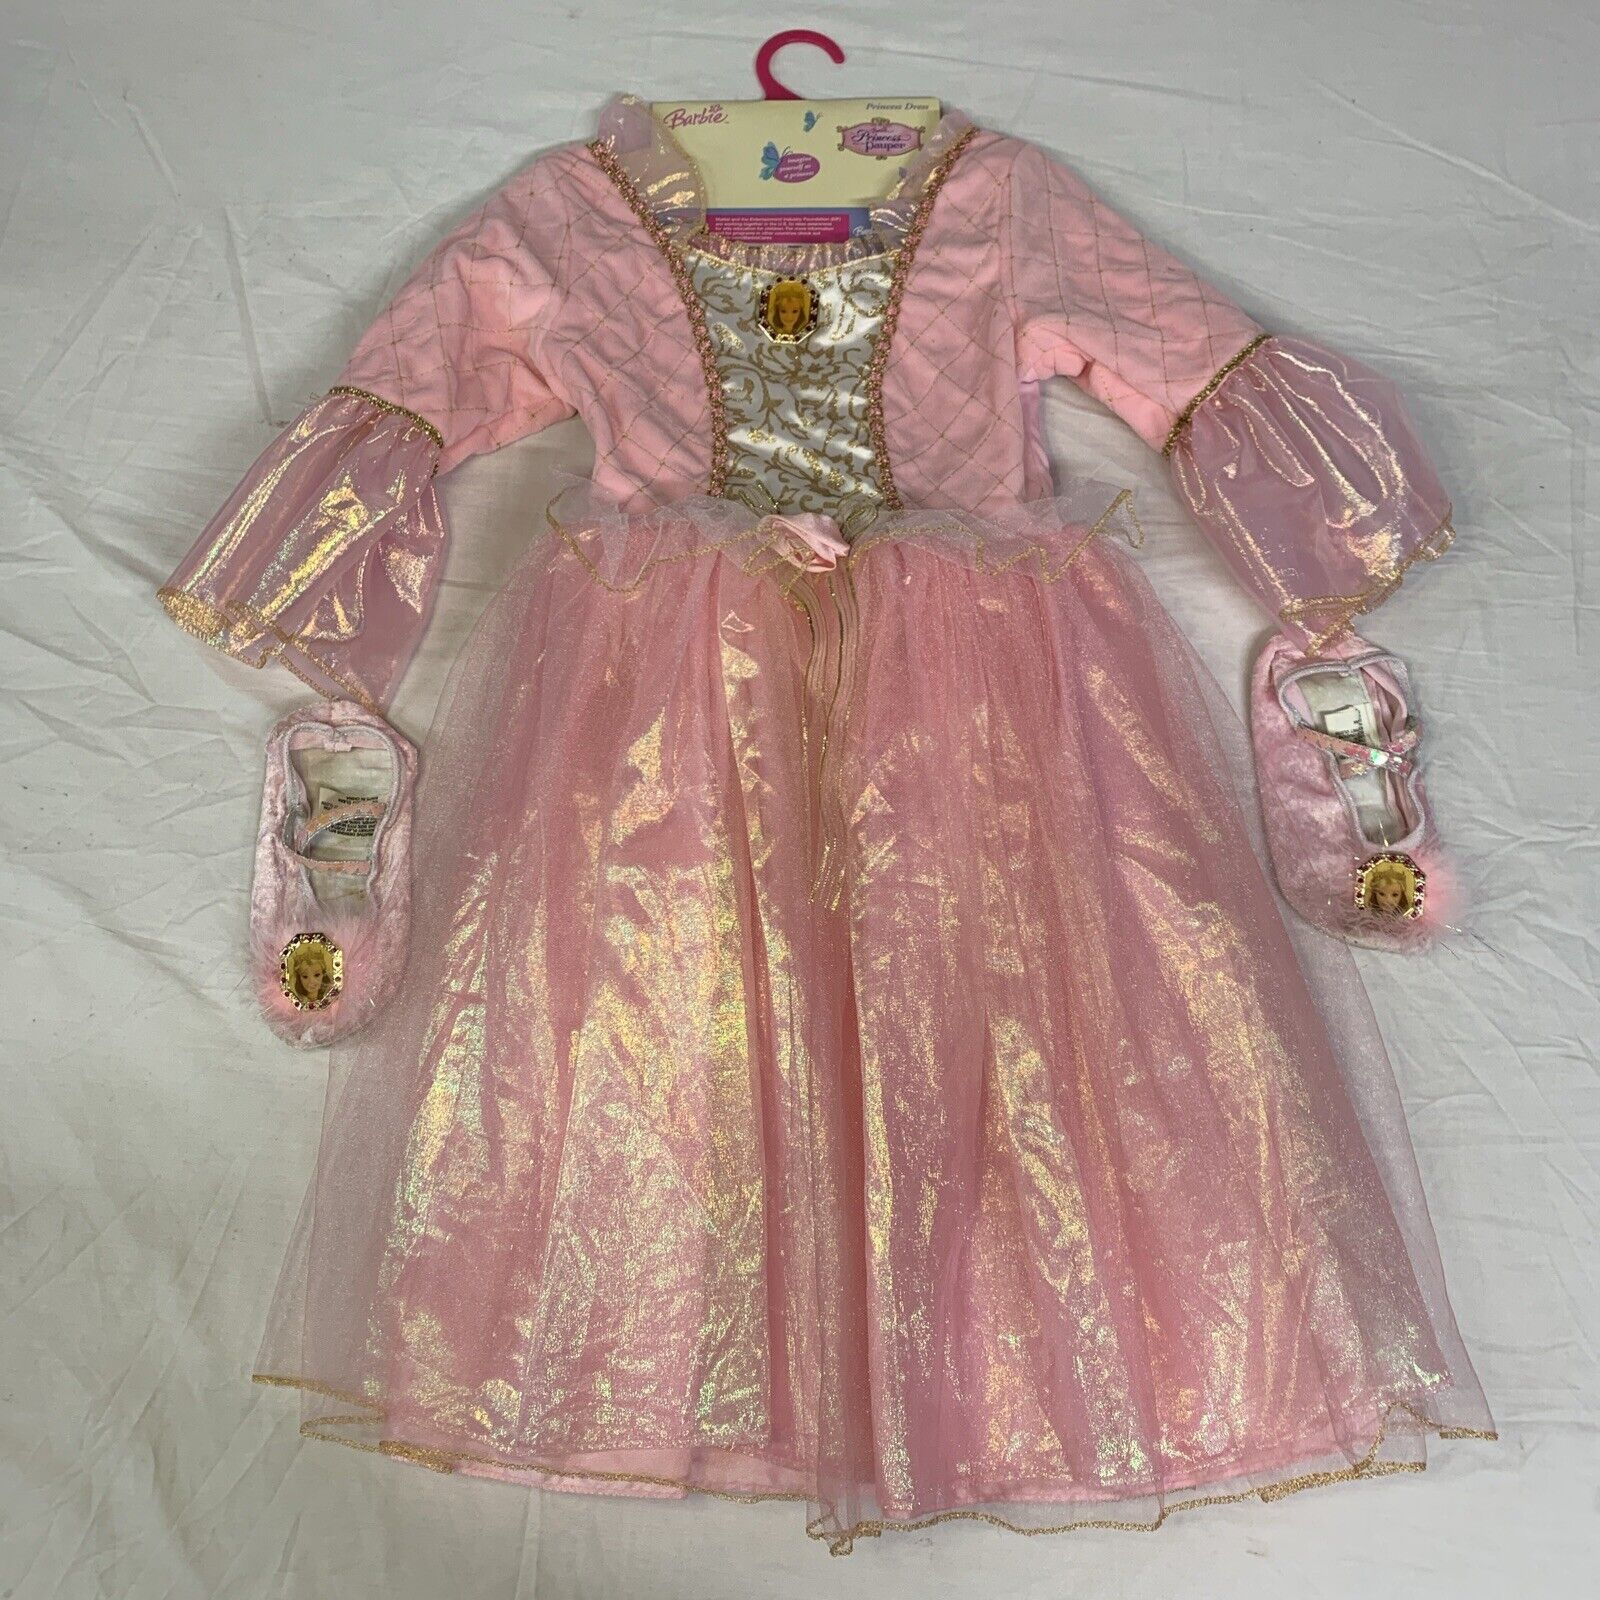 Vintage Barbie princess and the pauper Pink Princess dress and slippers